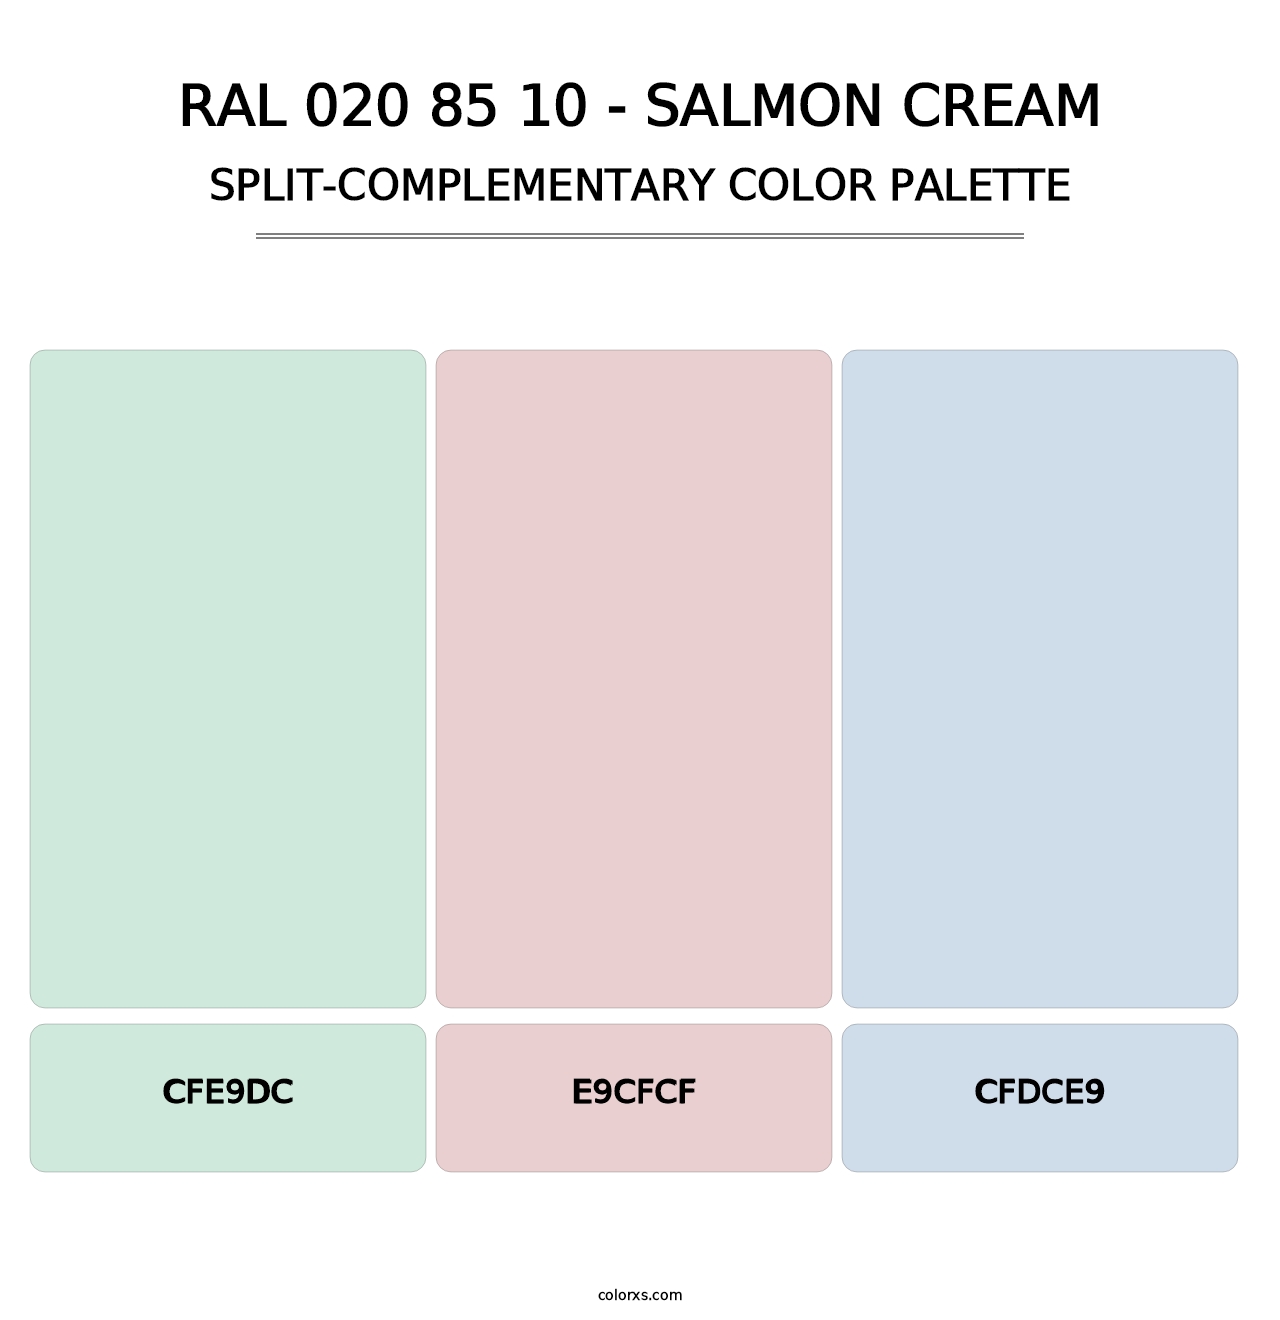 RAL 020 85 10 - Salmon Cream - Split-Complementary Color Palette